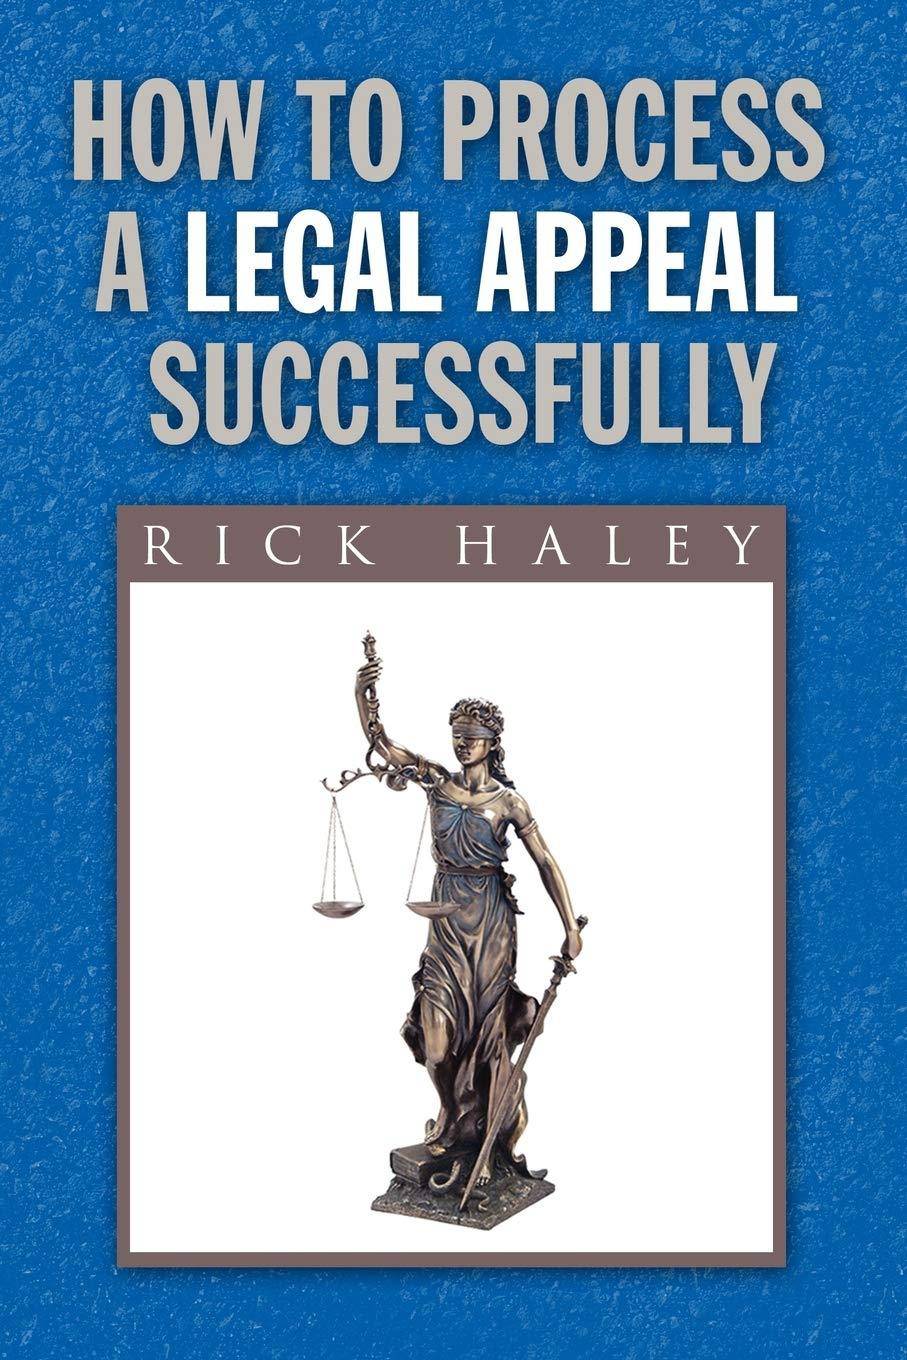 How to Process a Legal Appeal Successfully - SureShot Books Publishing LLC